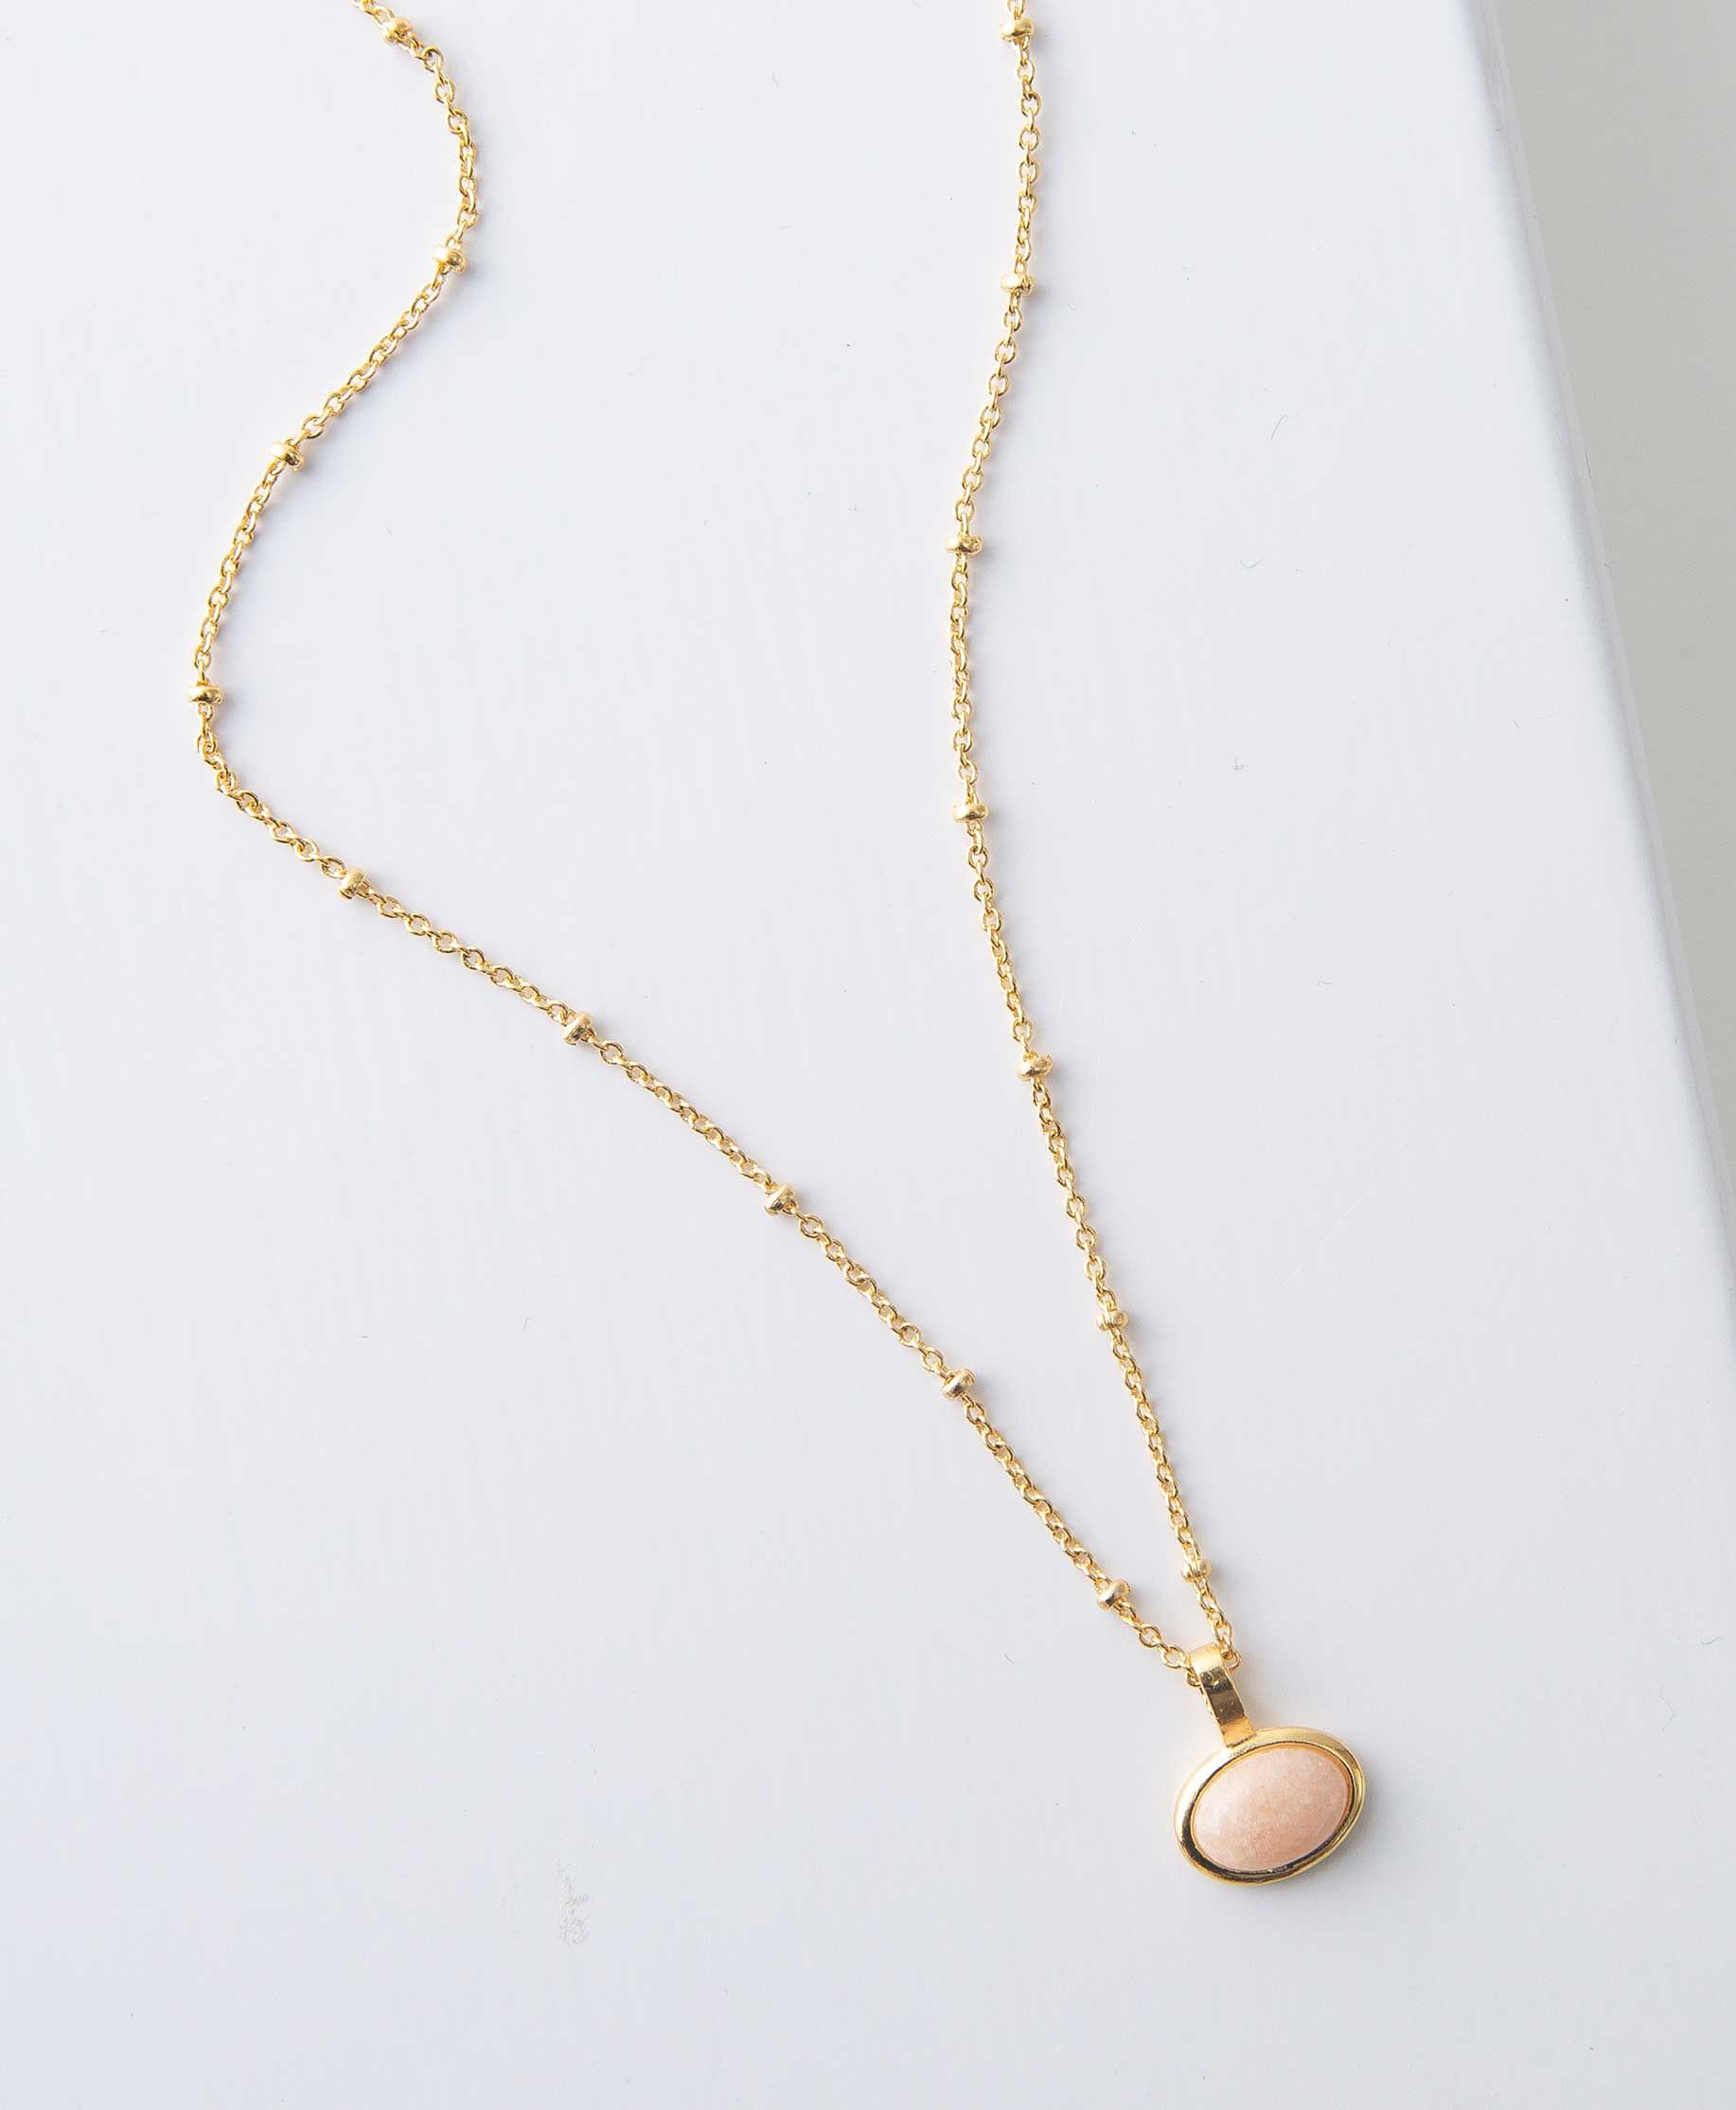 Lotus Necklace | Noonday Collection